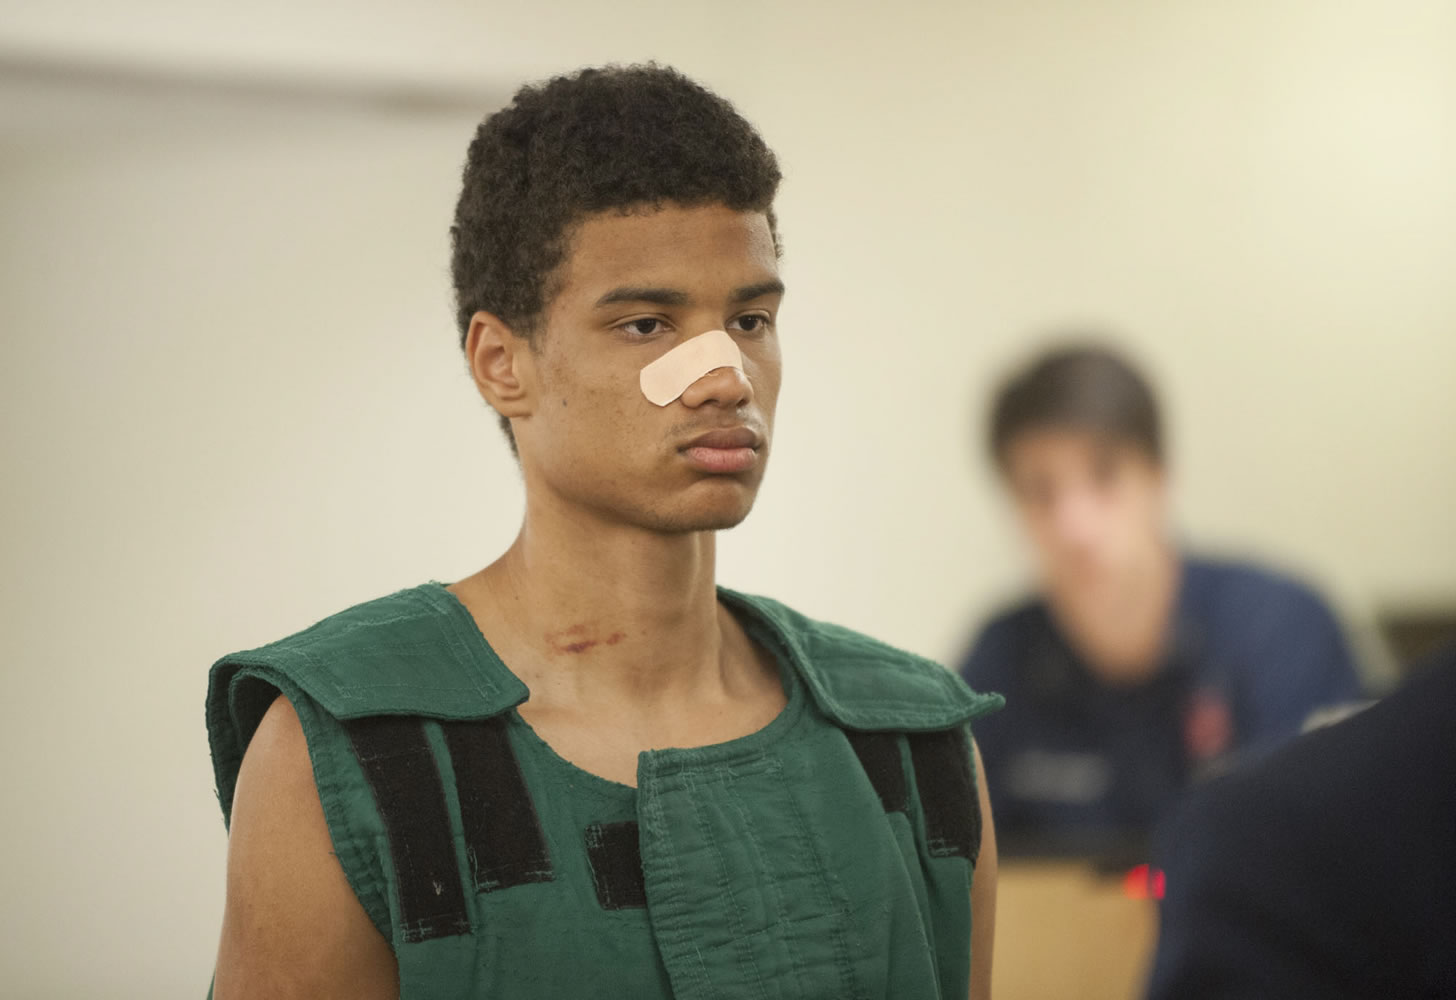 Tremaine S. Rambo, shown in court on April 20, was acquitted Thursday of second-degree attempted rape by reason of insanity. Rambo attacked a 26-year-old woman on the Burnt Bridge Creek Trail in April, according to court documents.